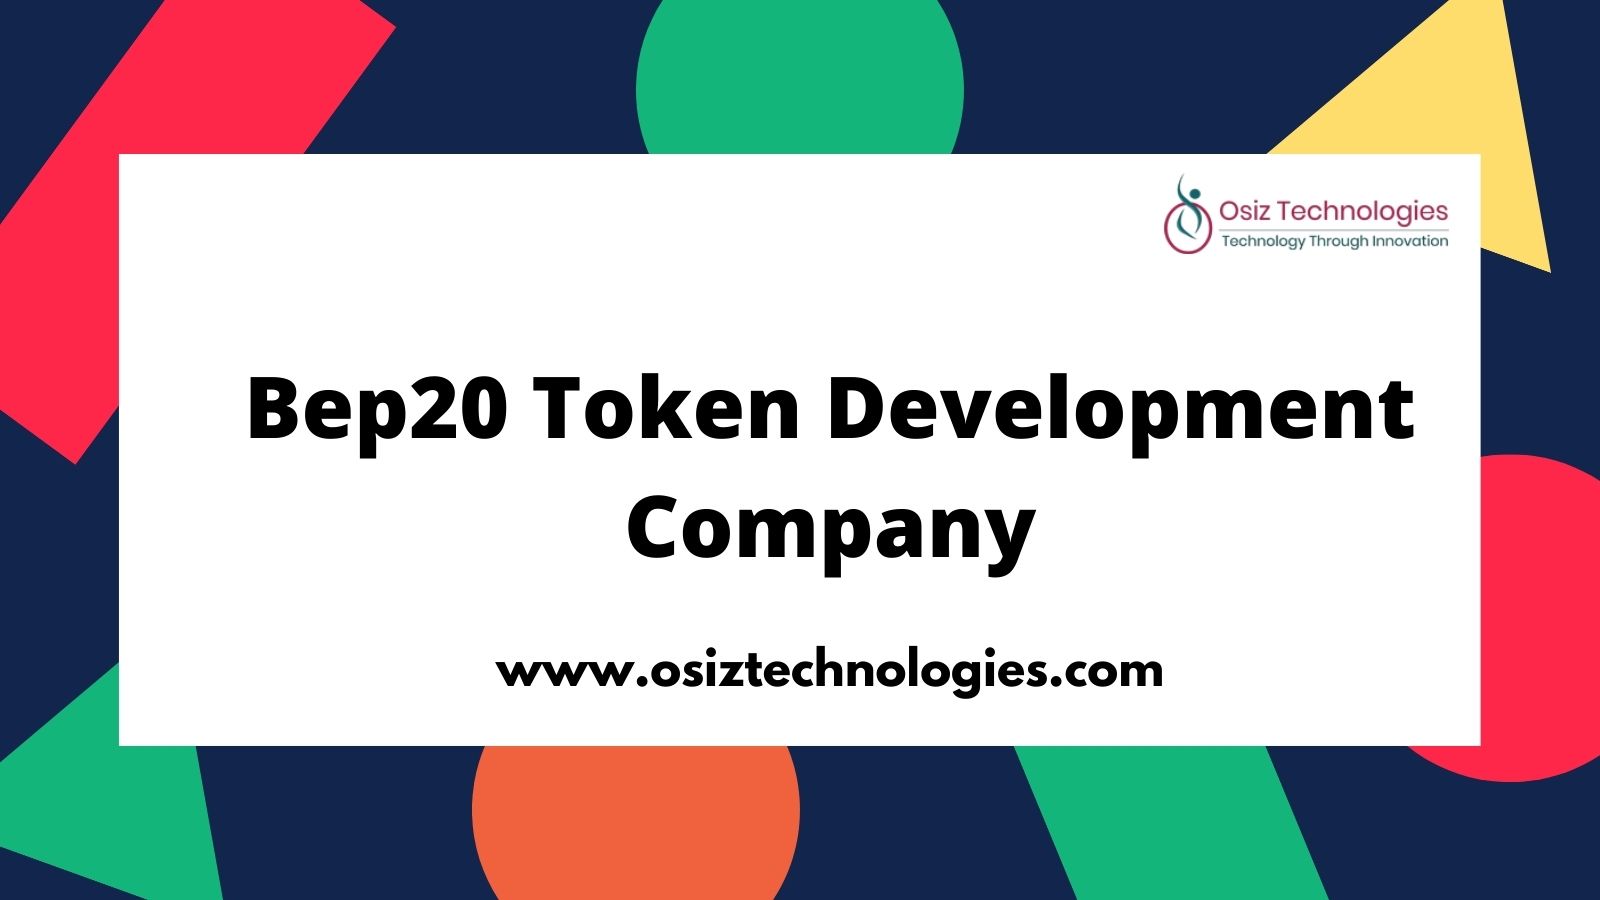 Article about how to create a bep20 token now - bep20 token development services